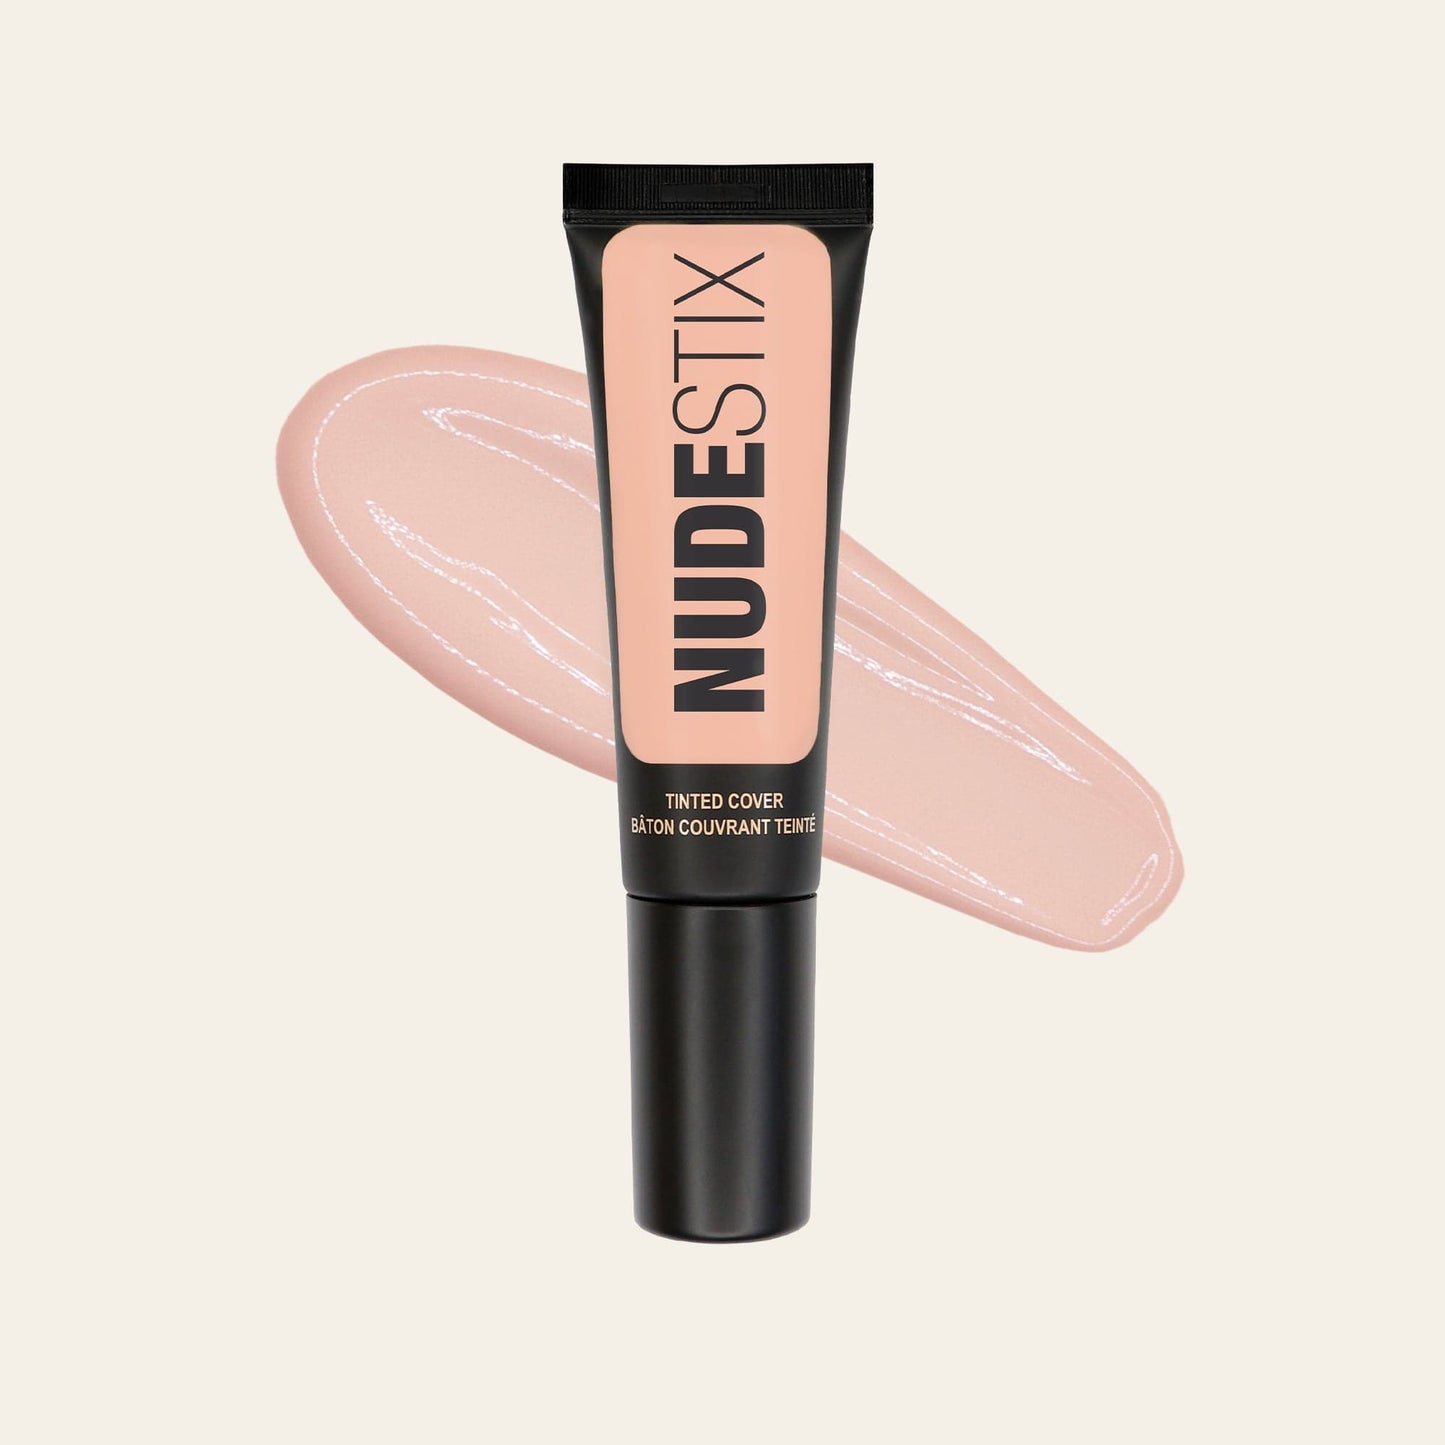 Tinted Cover Liquid Foundation in shade Nude 2